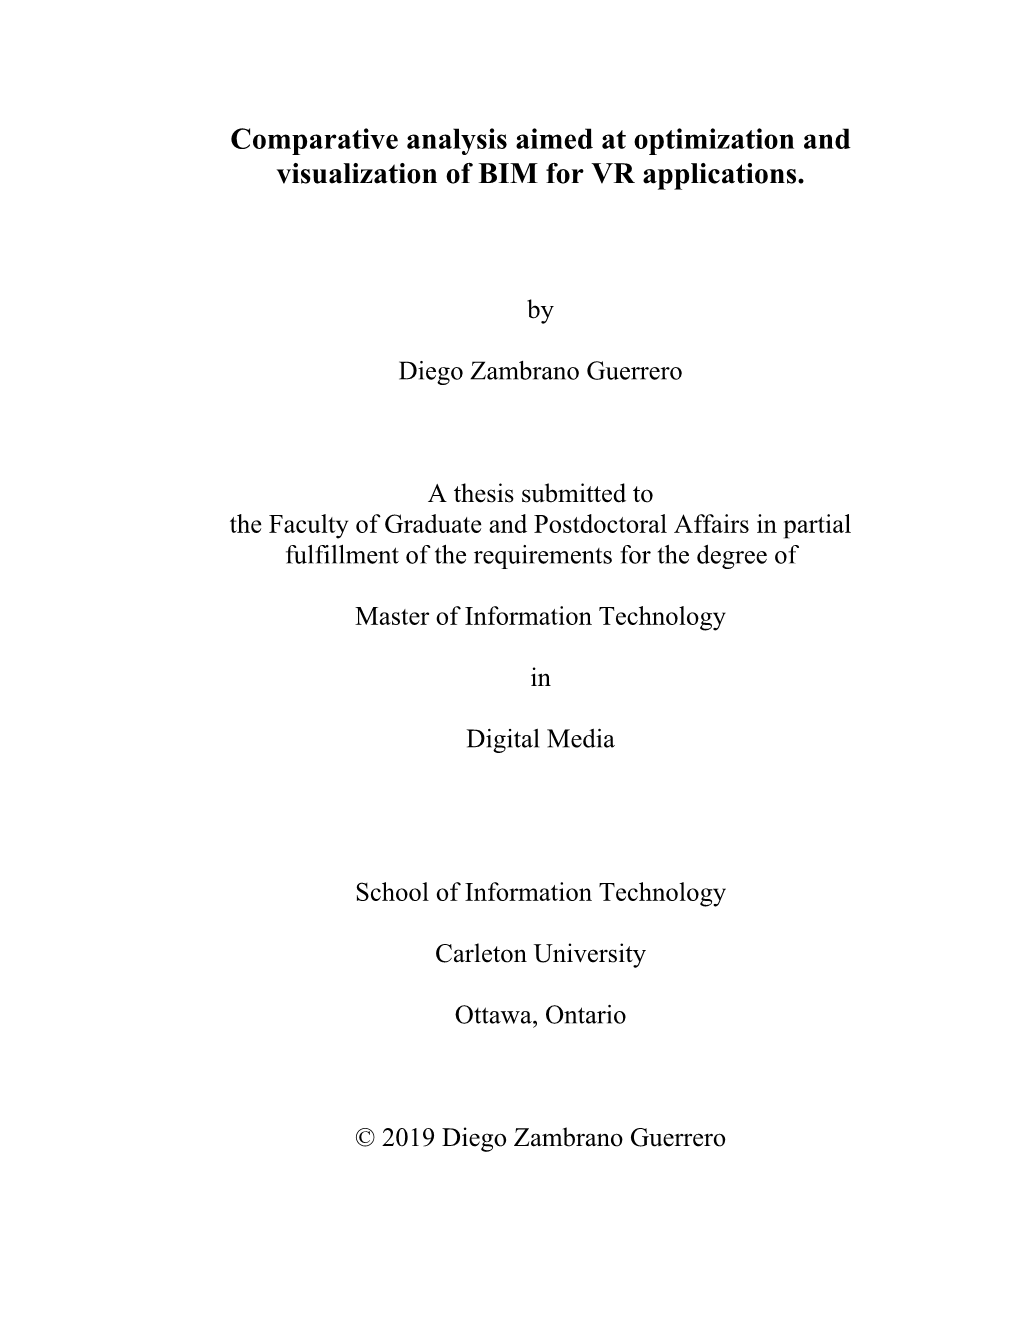 Comparative Analysis Aimed at Optimization and Visualization of BIM for VR Applications